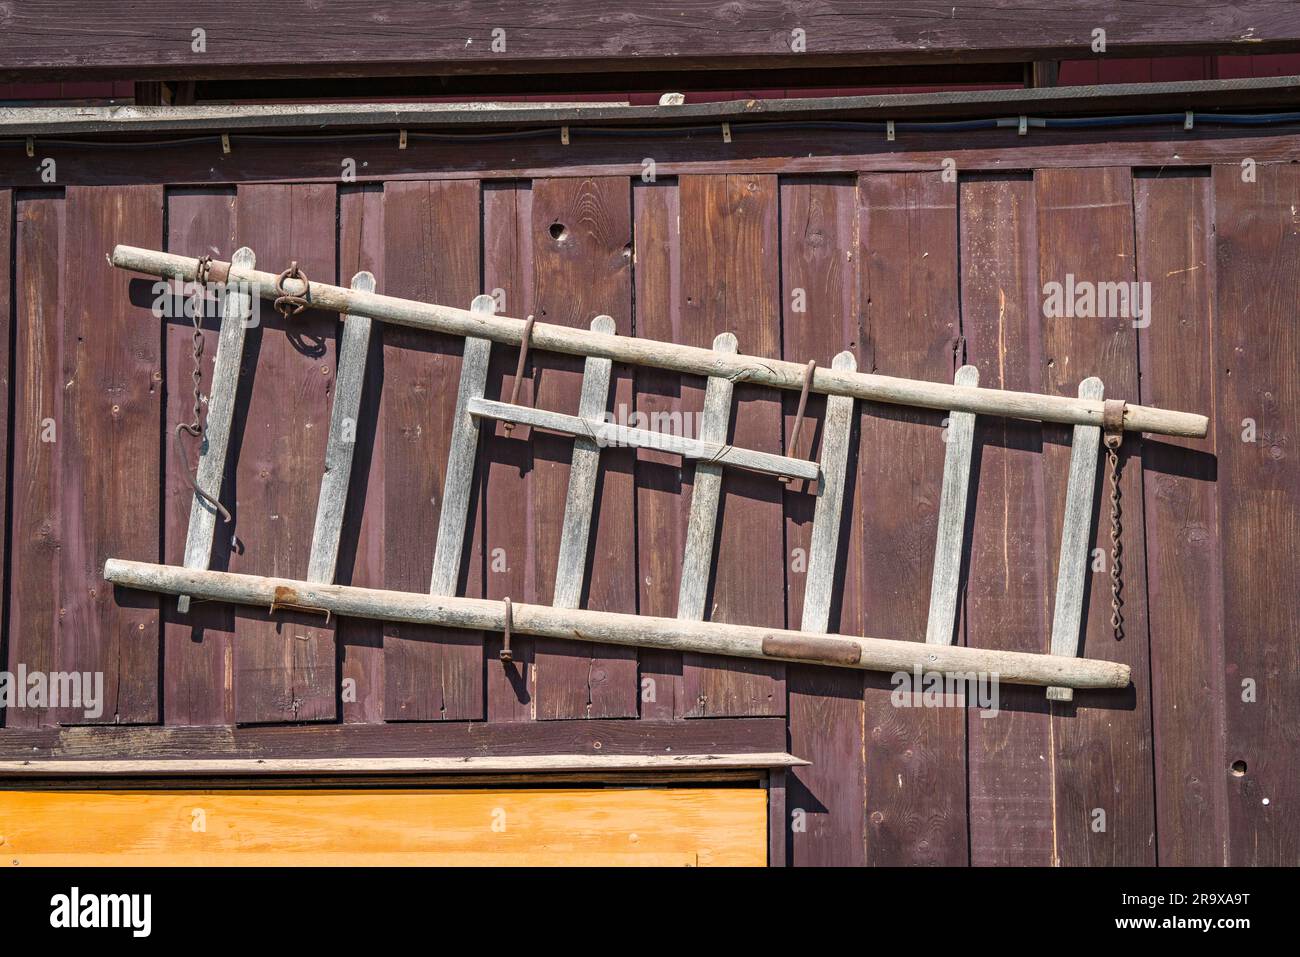 Wooden ladder hanging on the wall of a shed in the country Stock Photo